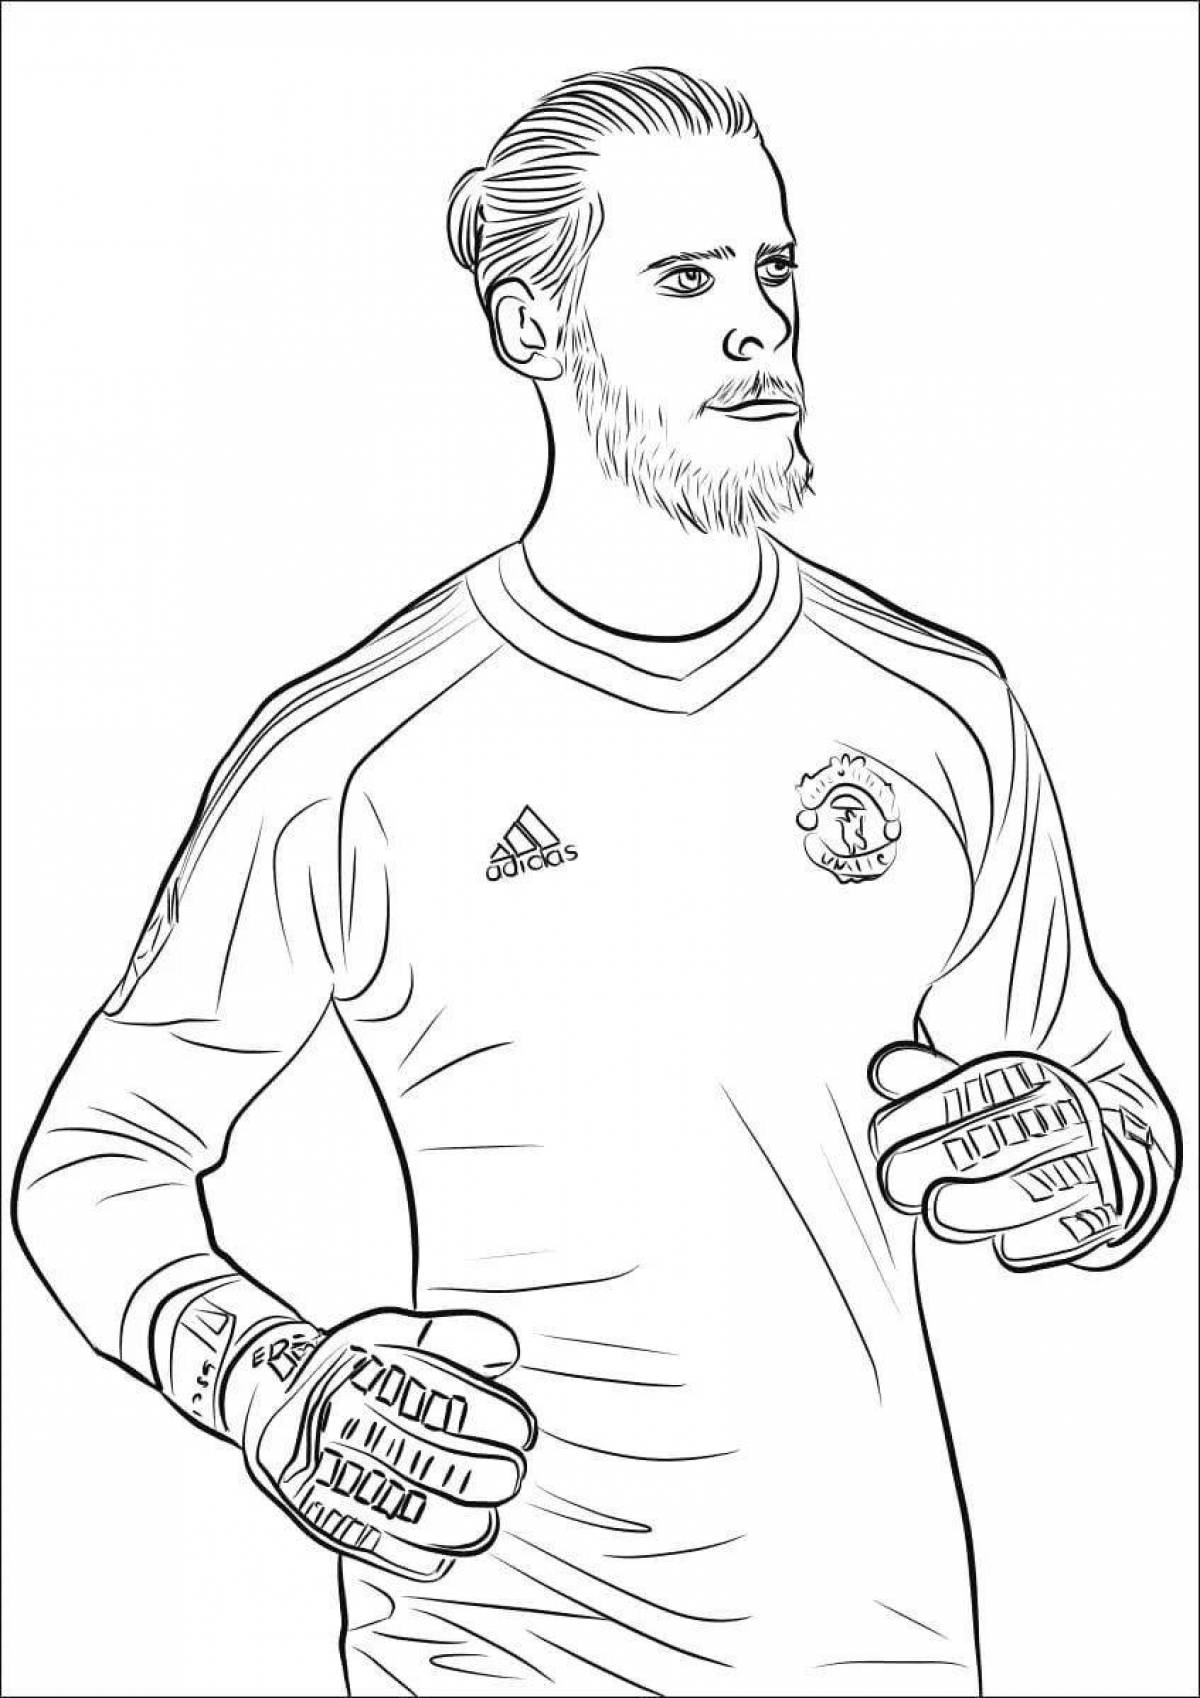 Coloring page playful football players